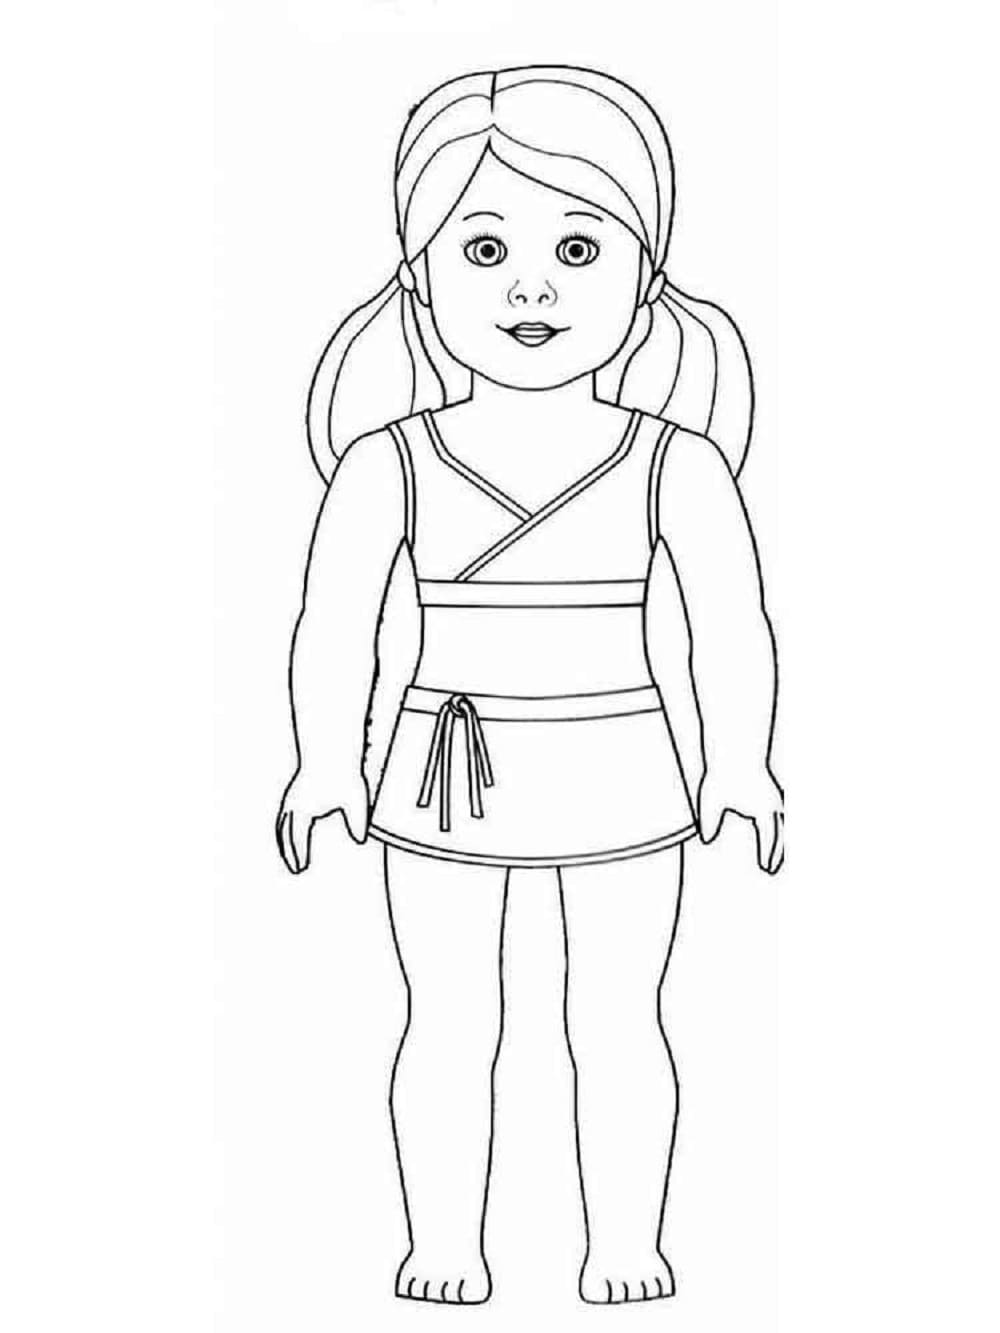 Cute Printable American Girl Doll Coloring Page